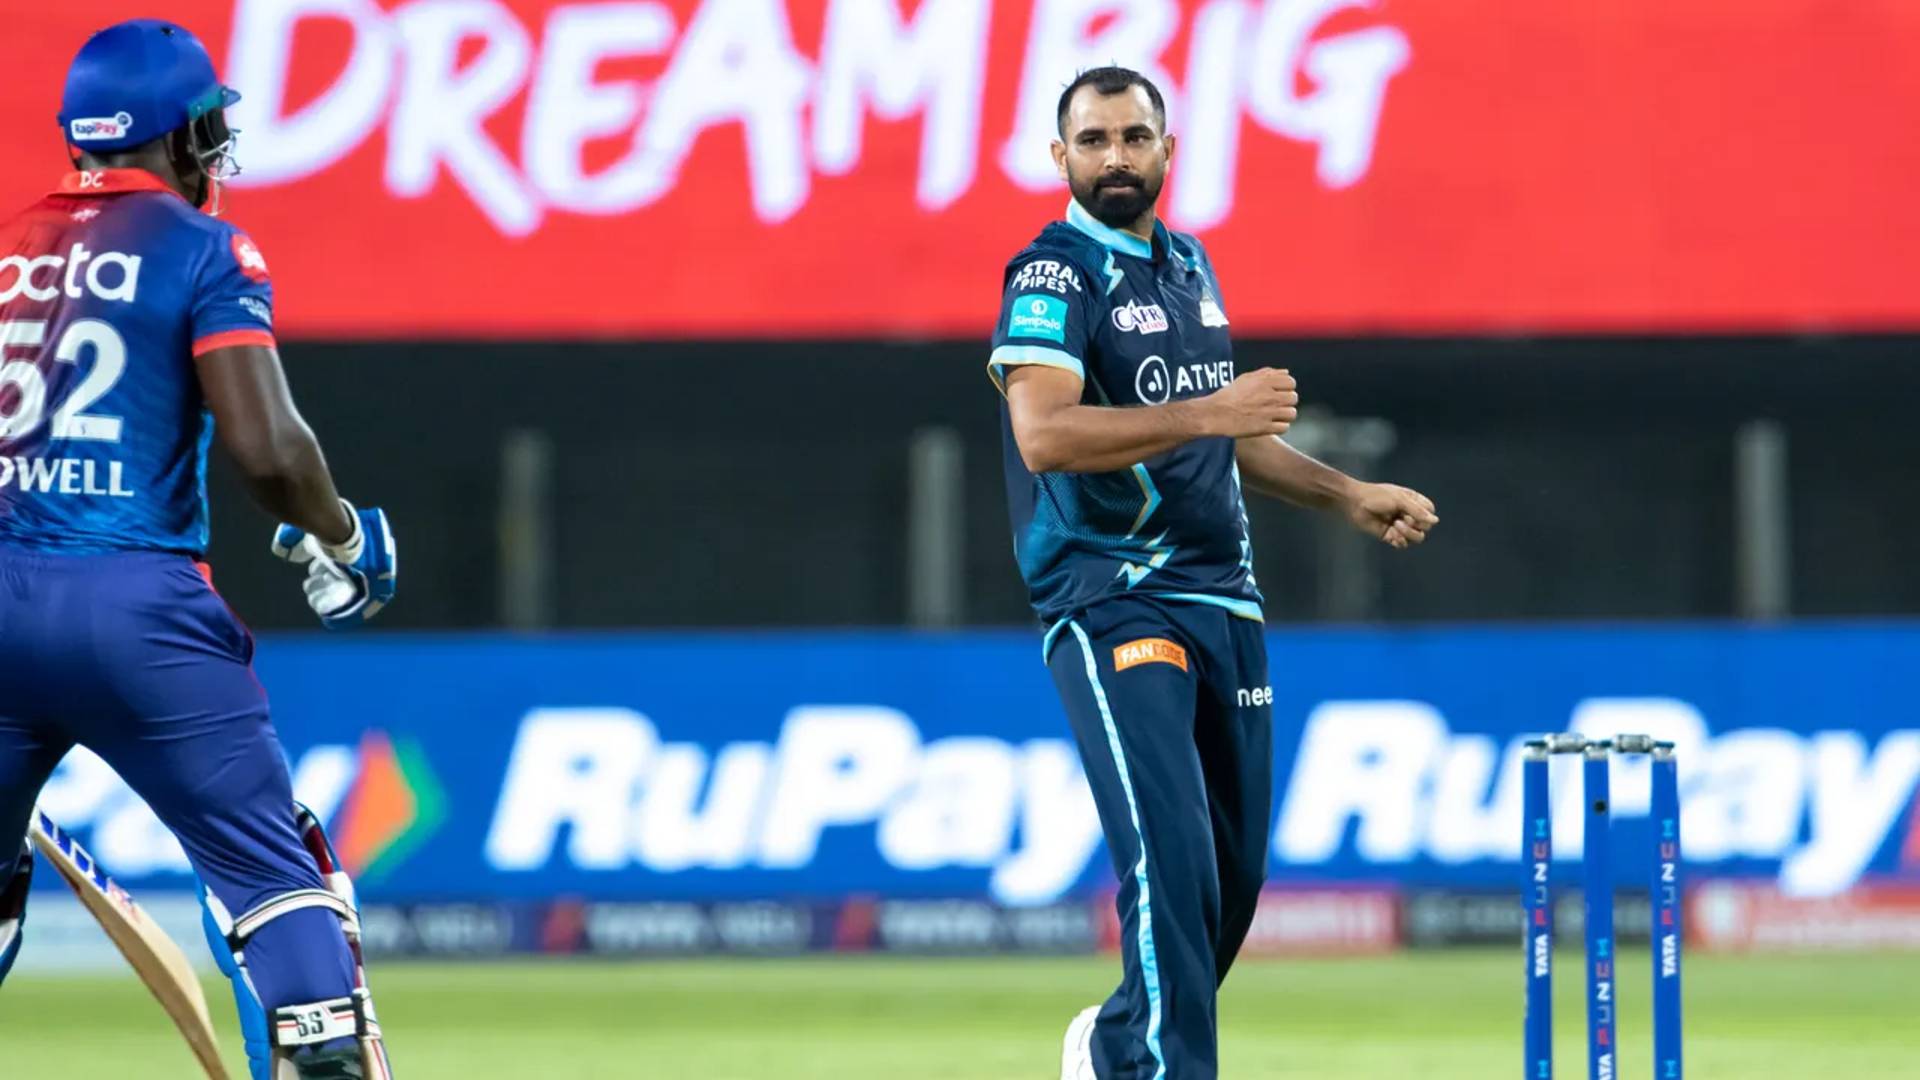 Mohammed Shami Tested Covid-19 Positive, Ruled Out Of Australia Series